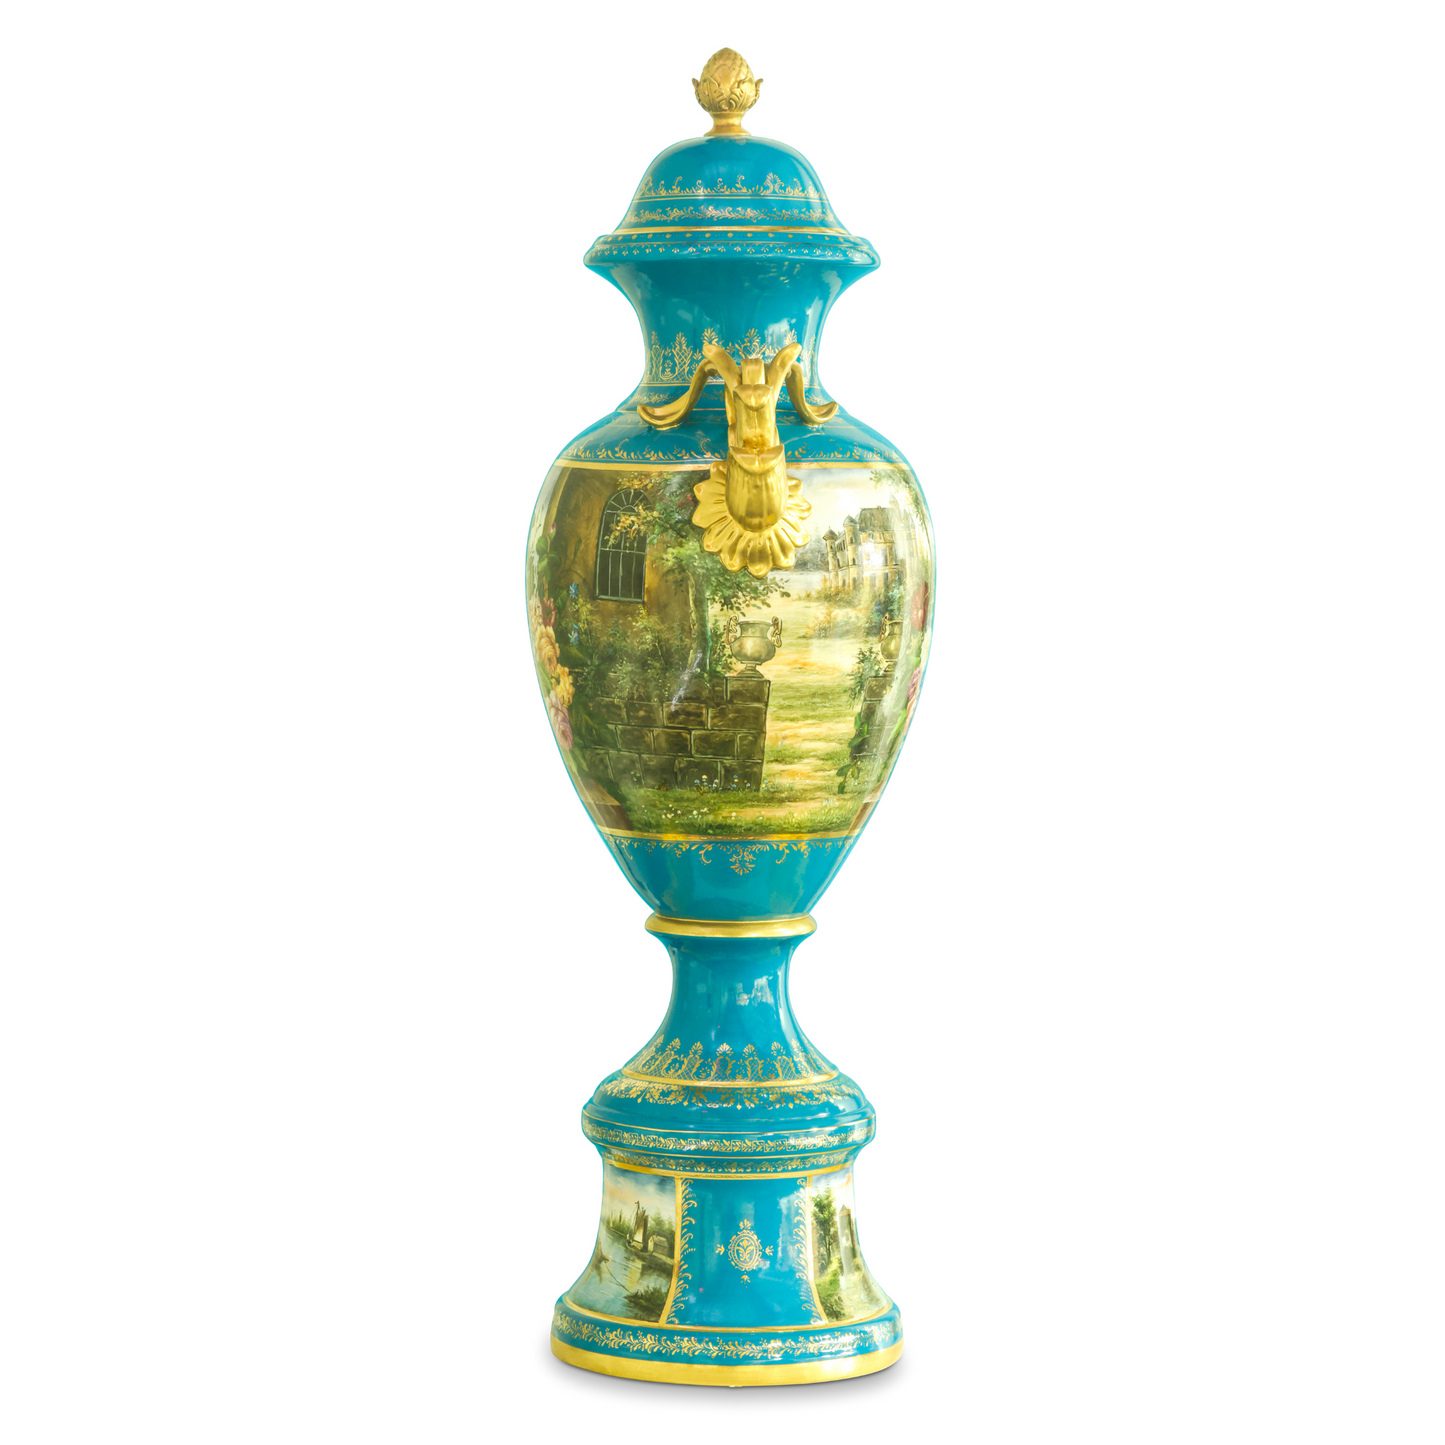 Teal Baroque Style Hand-Painted Floral Motif Vase